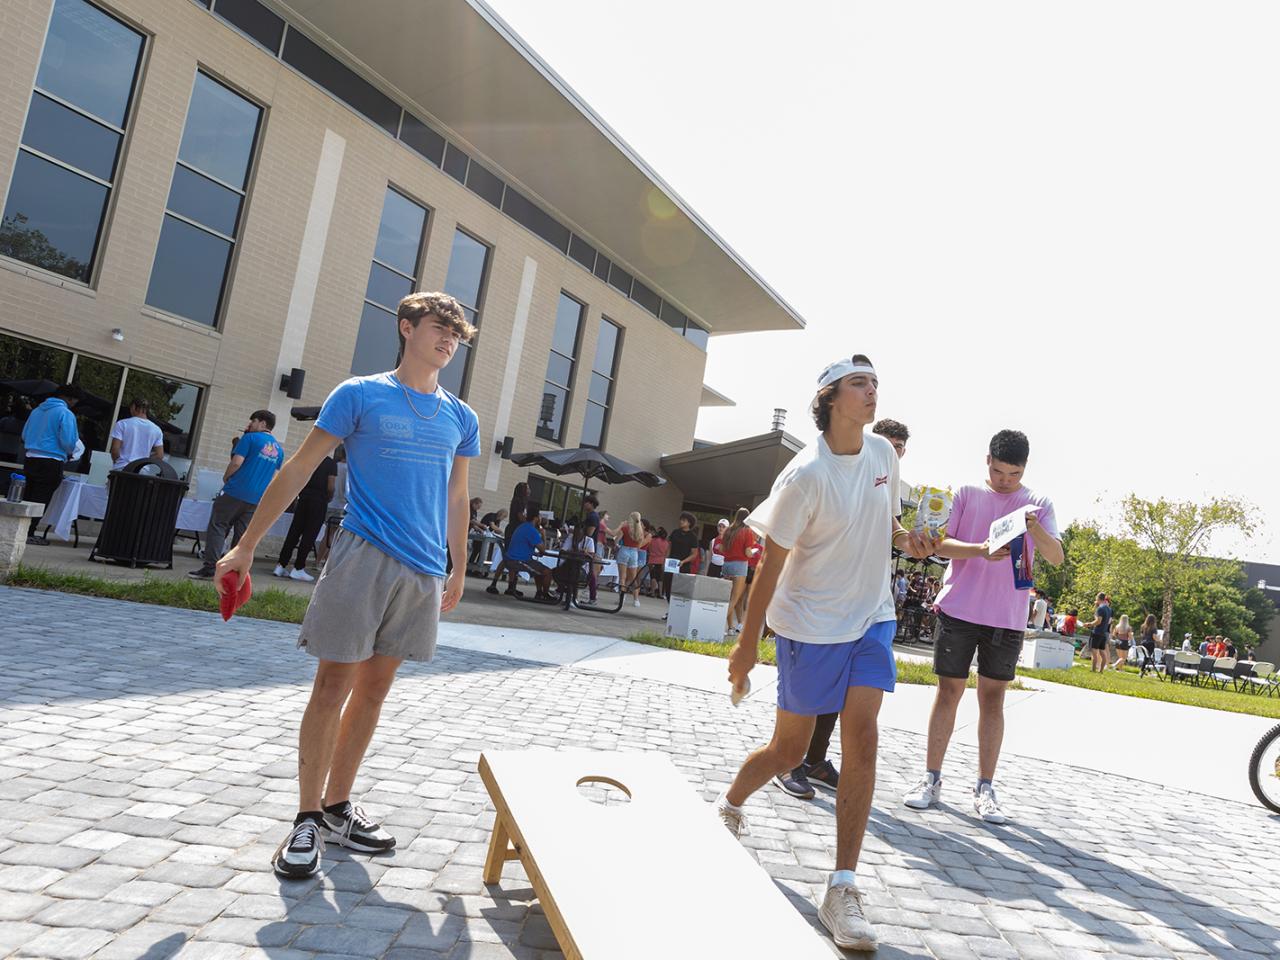 Students play a game of cornhole during the post-Convocation lunch on the patio of the Warner Center.